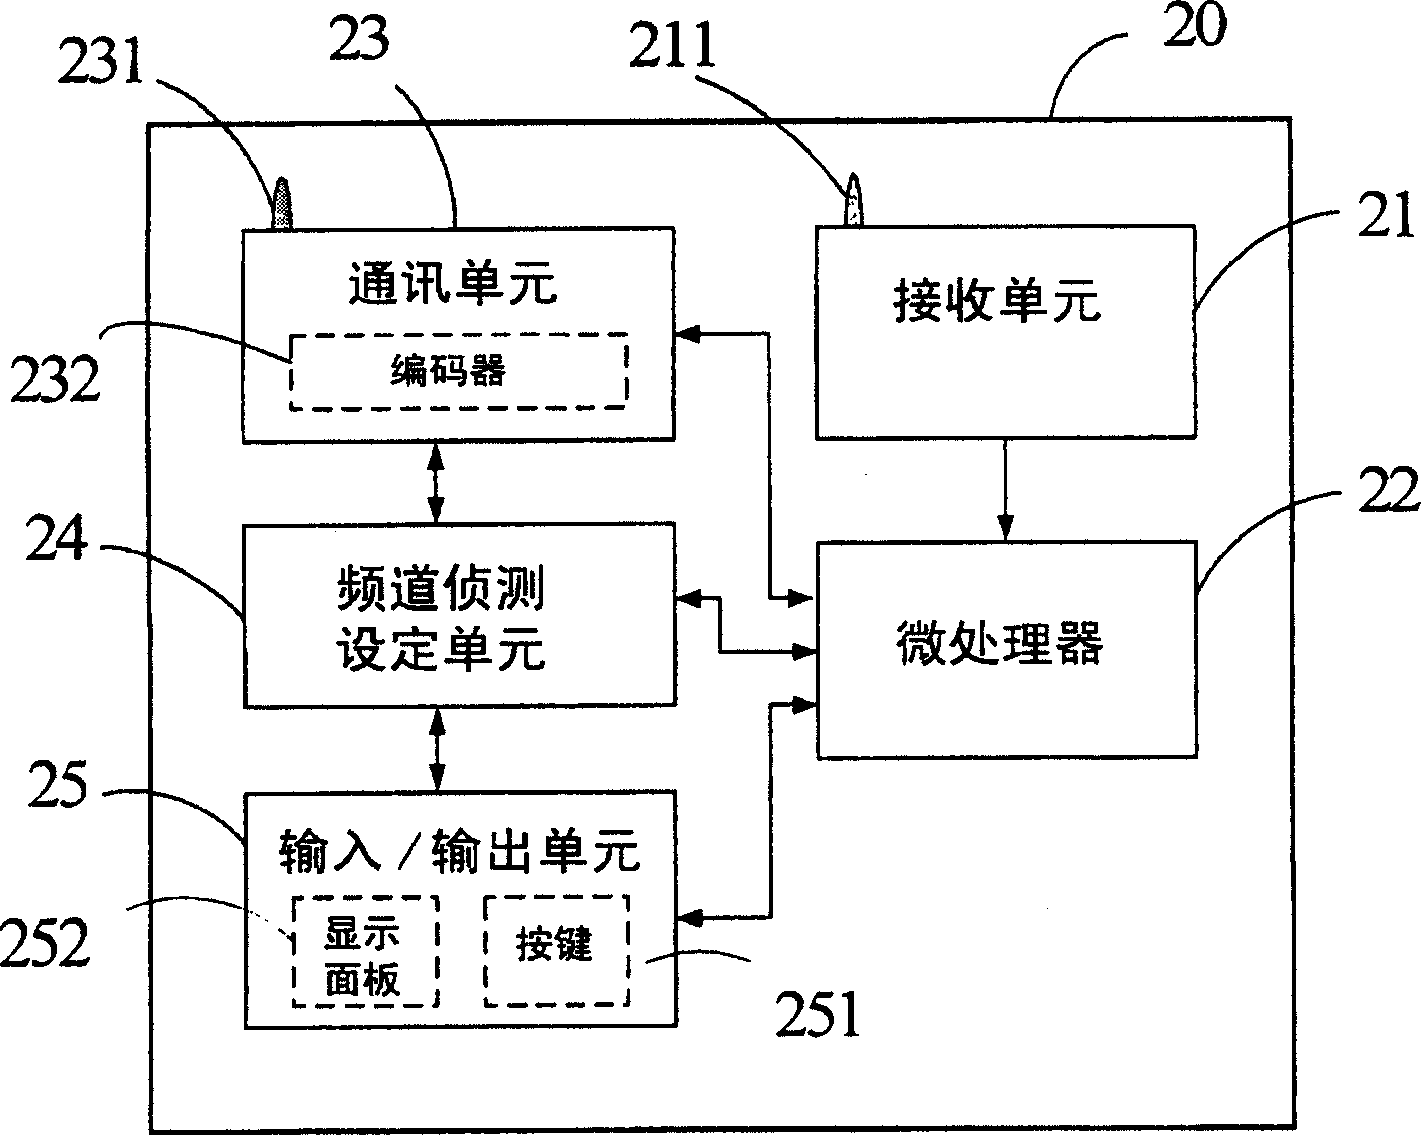 Method for searching available frequency band used in digital broadcast receiving and retransmitting device